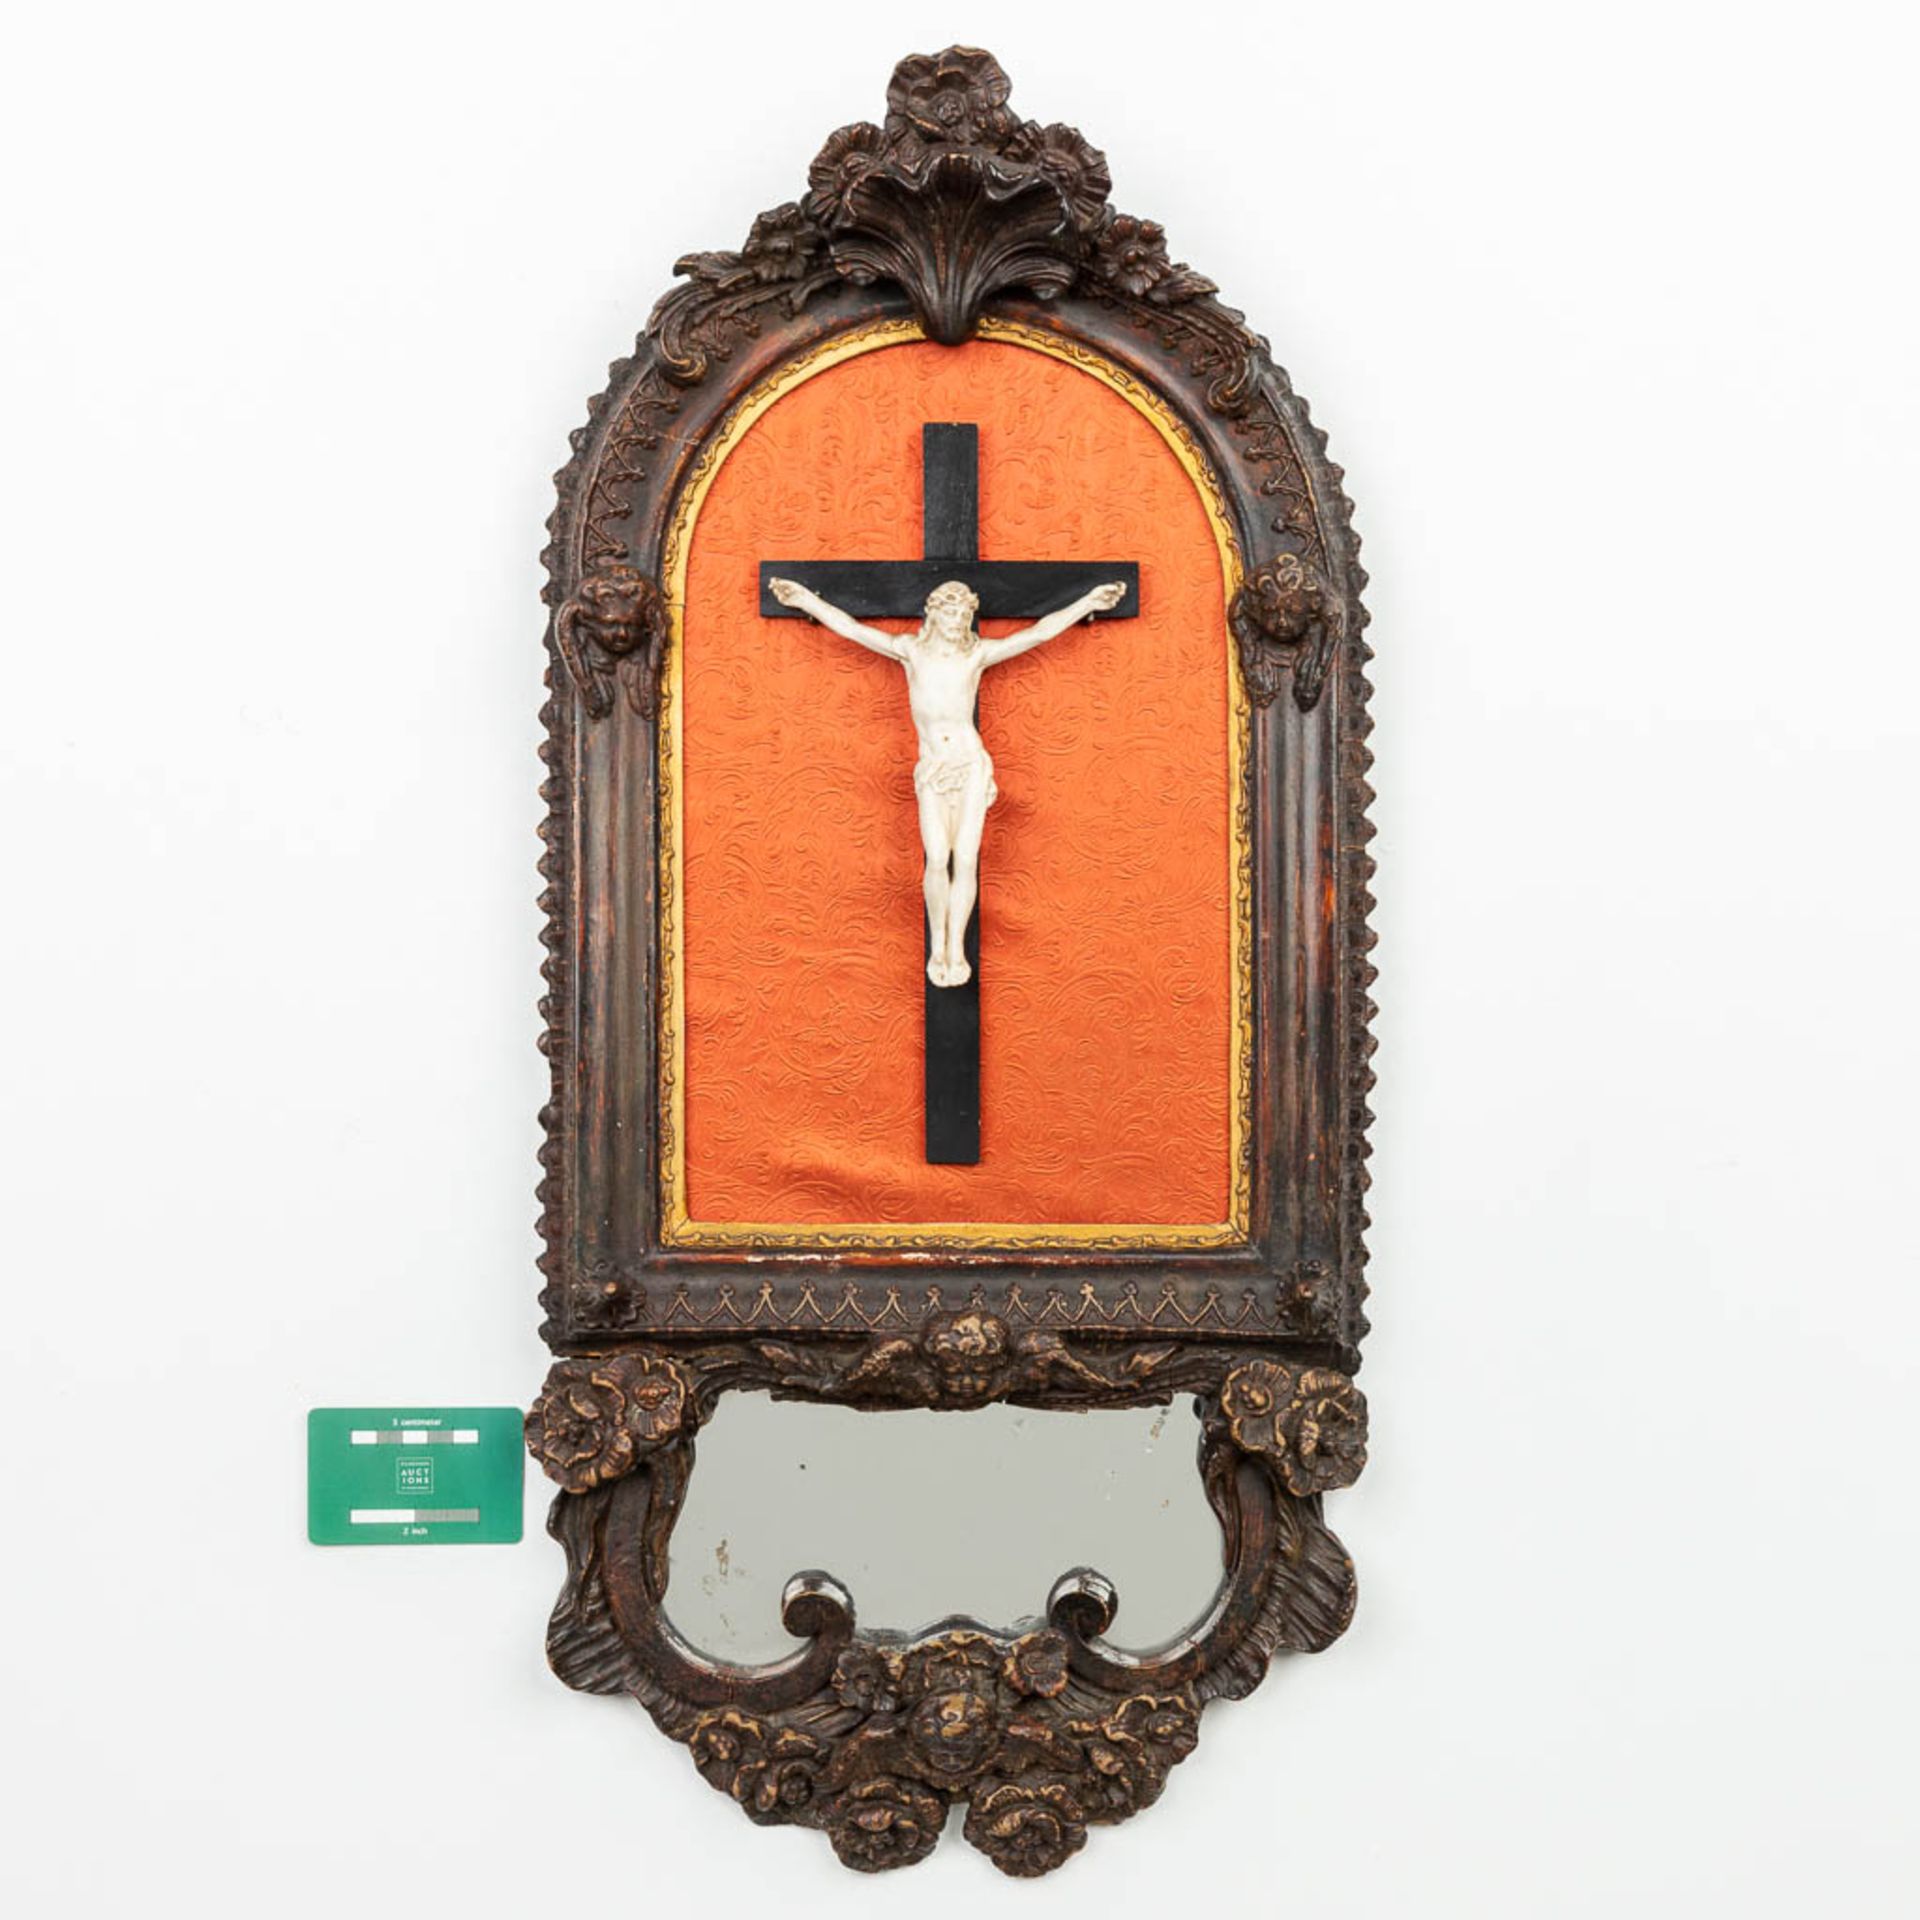 A wood sculpture with bisque porcelain Corpus Christi finished with a mirror and an angel. (H:71cm) - Image 8 of 10